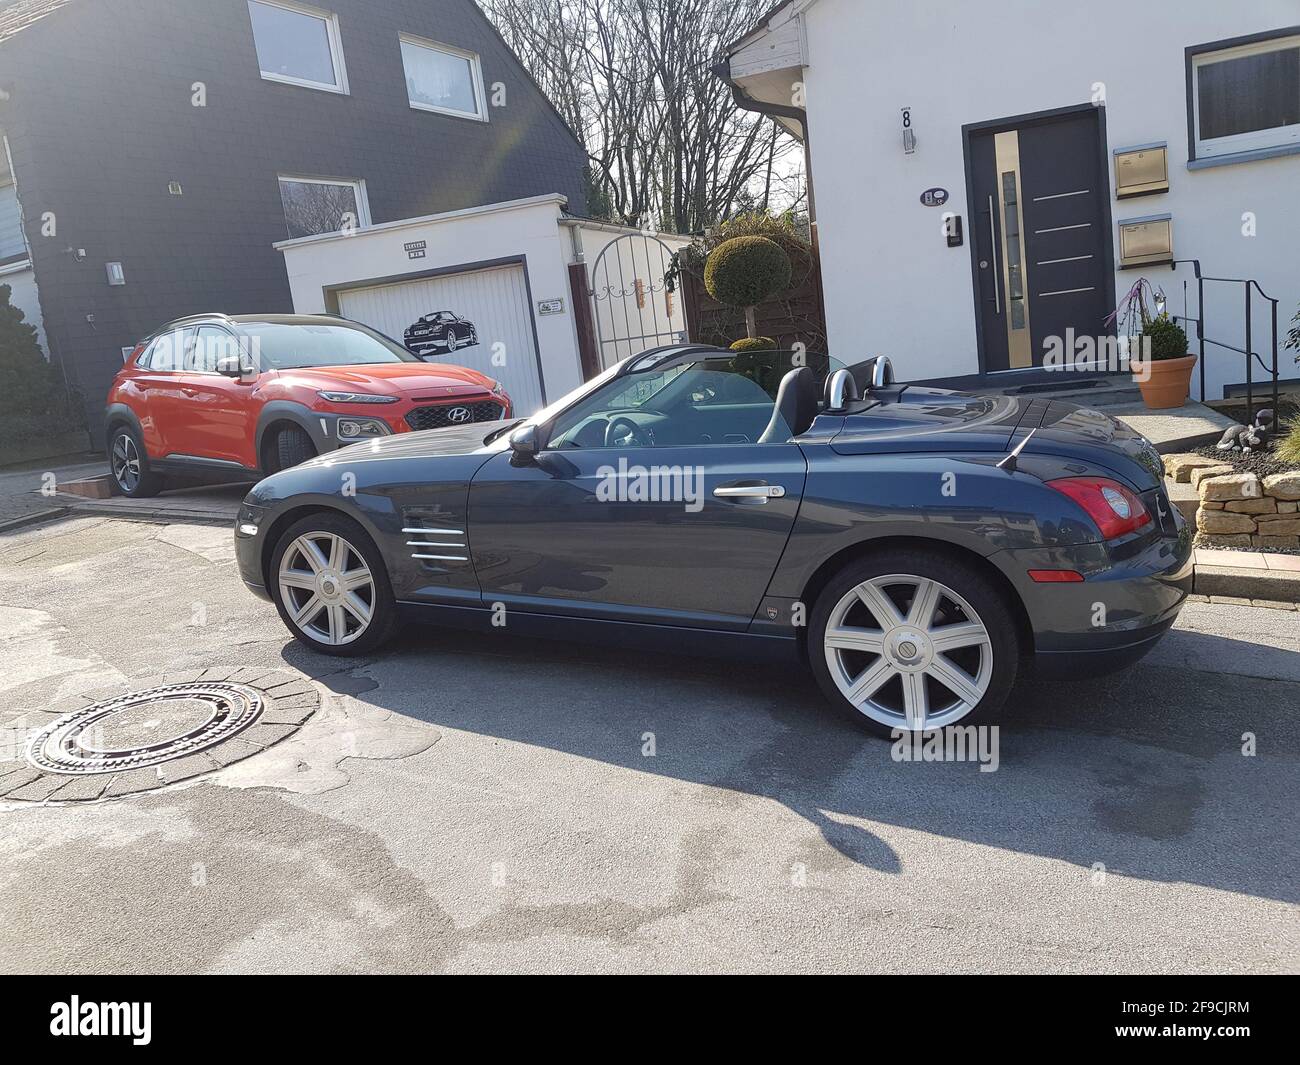 HEILIGENHAUS, NRW, GERMANY - MARCH 28, 2020: A Hyundai Kona SUV and Chrysler Crossfire Roadster park in front of a house Stock Photo